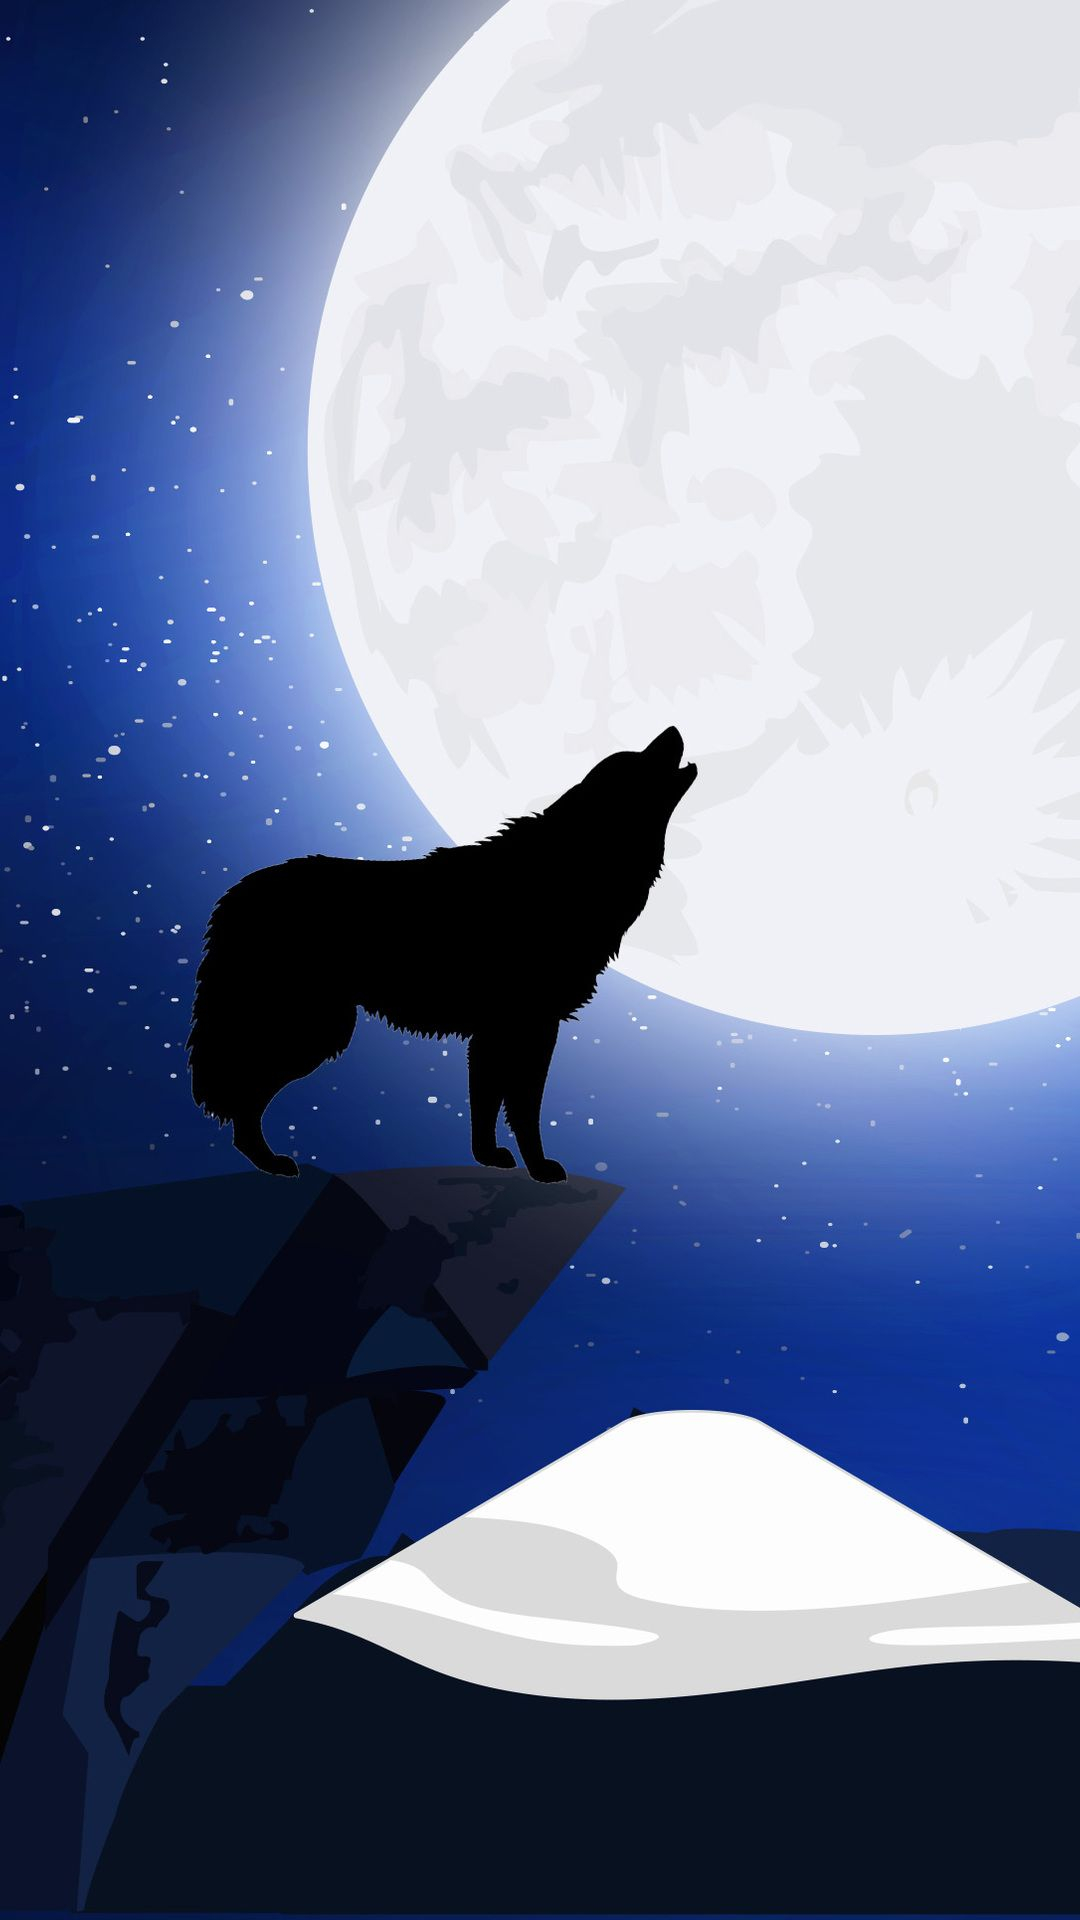 1080x1920 Wolf Howling In Resolution | Wolf wallpaper, Dark drawings, Wolf howling